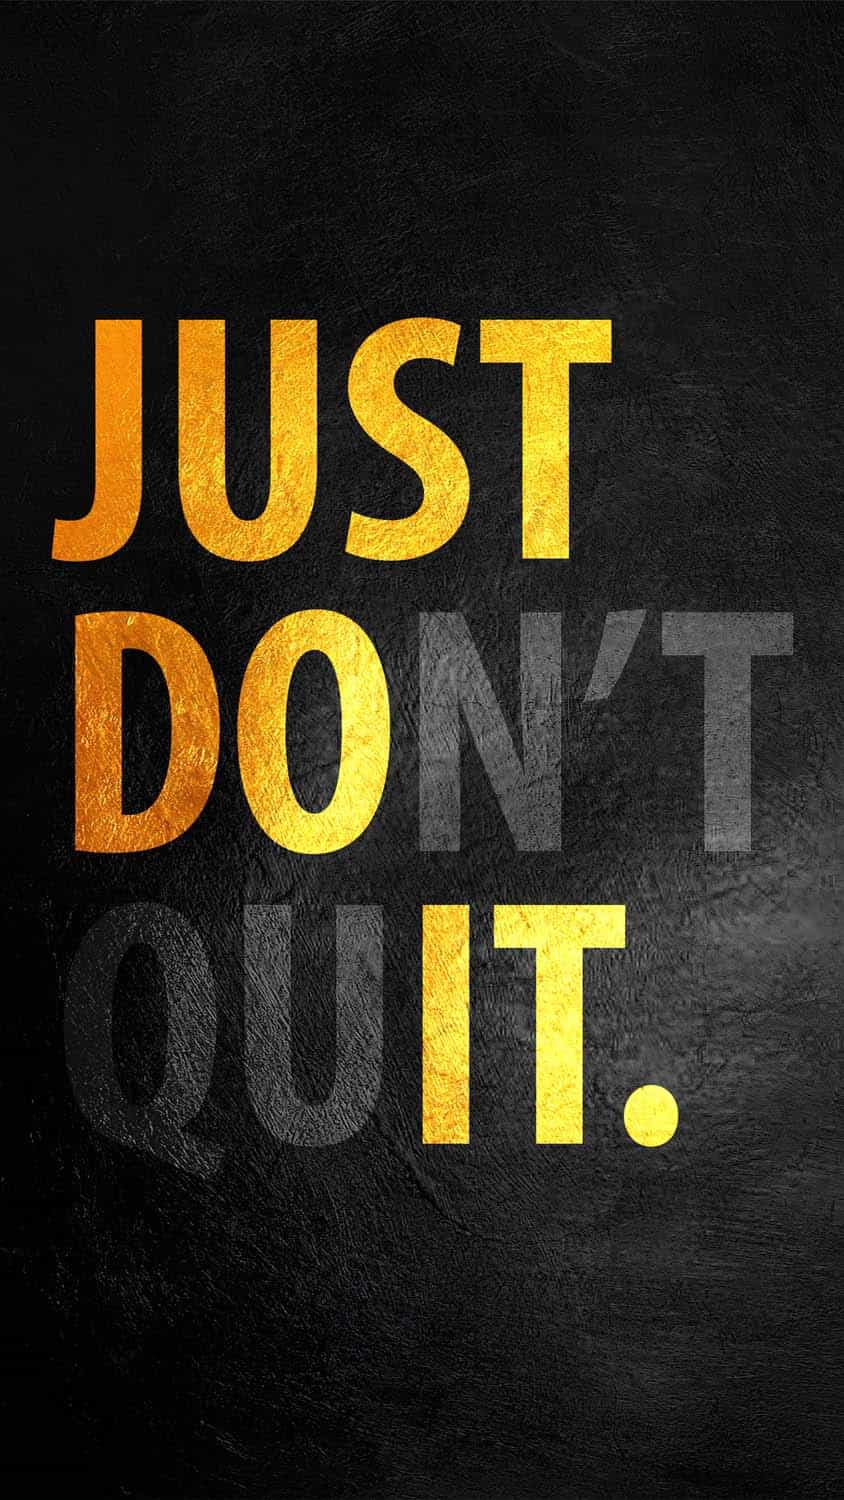 Just Dont Quit IPhone Wallpaper HD  IPhone Wallpapers